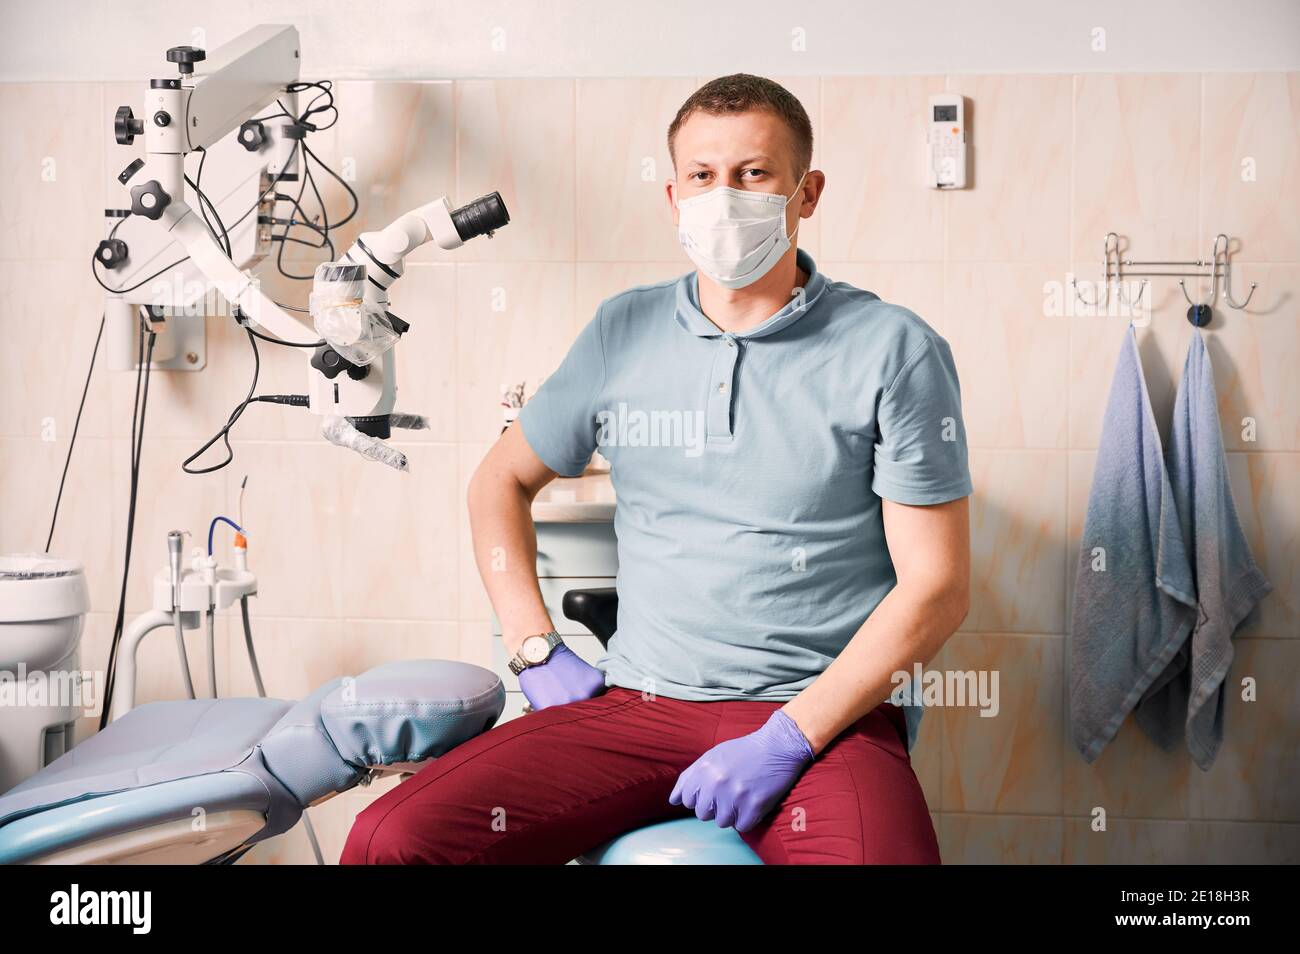 Portrait of man dentist in sterile gloves and medical mask looking at camera. Male stomatologist sitting near dental microscope. Concept of dentistry and stomatology. Stock Photo